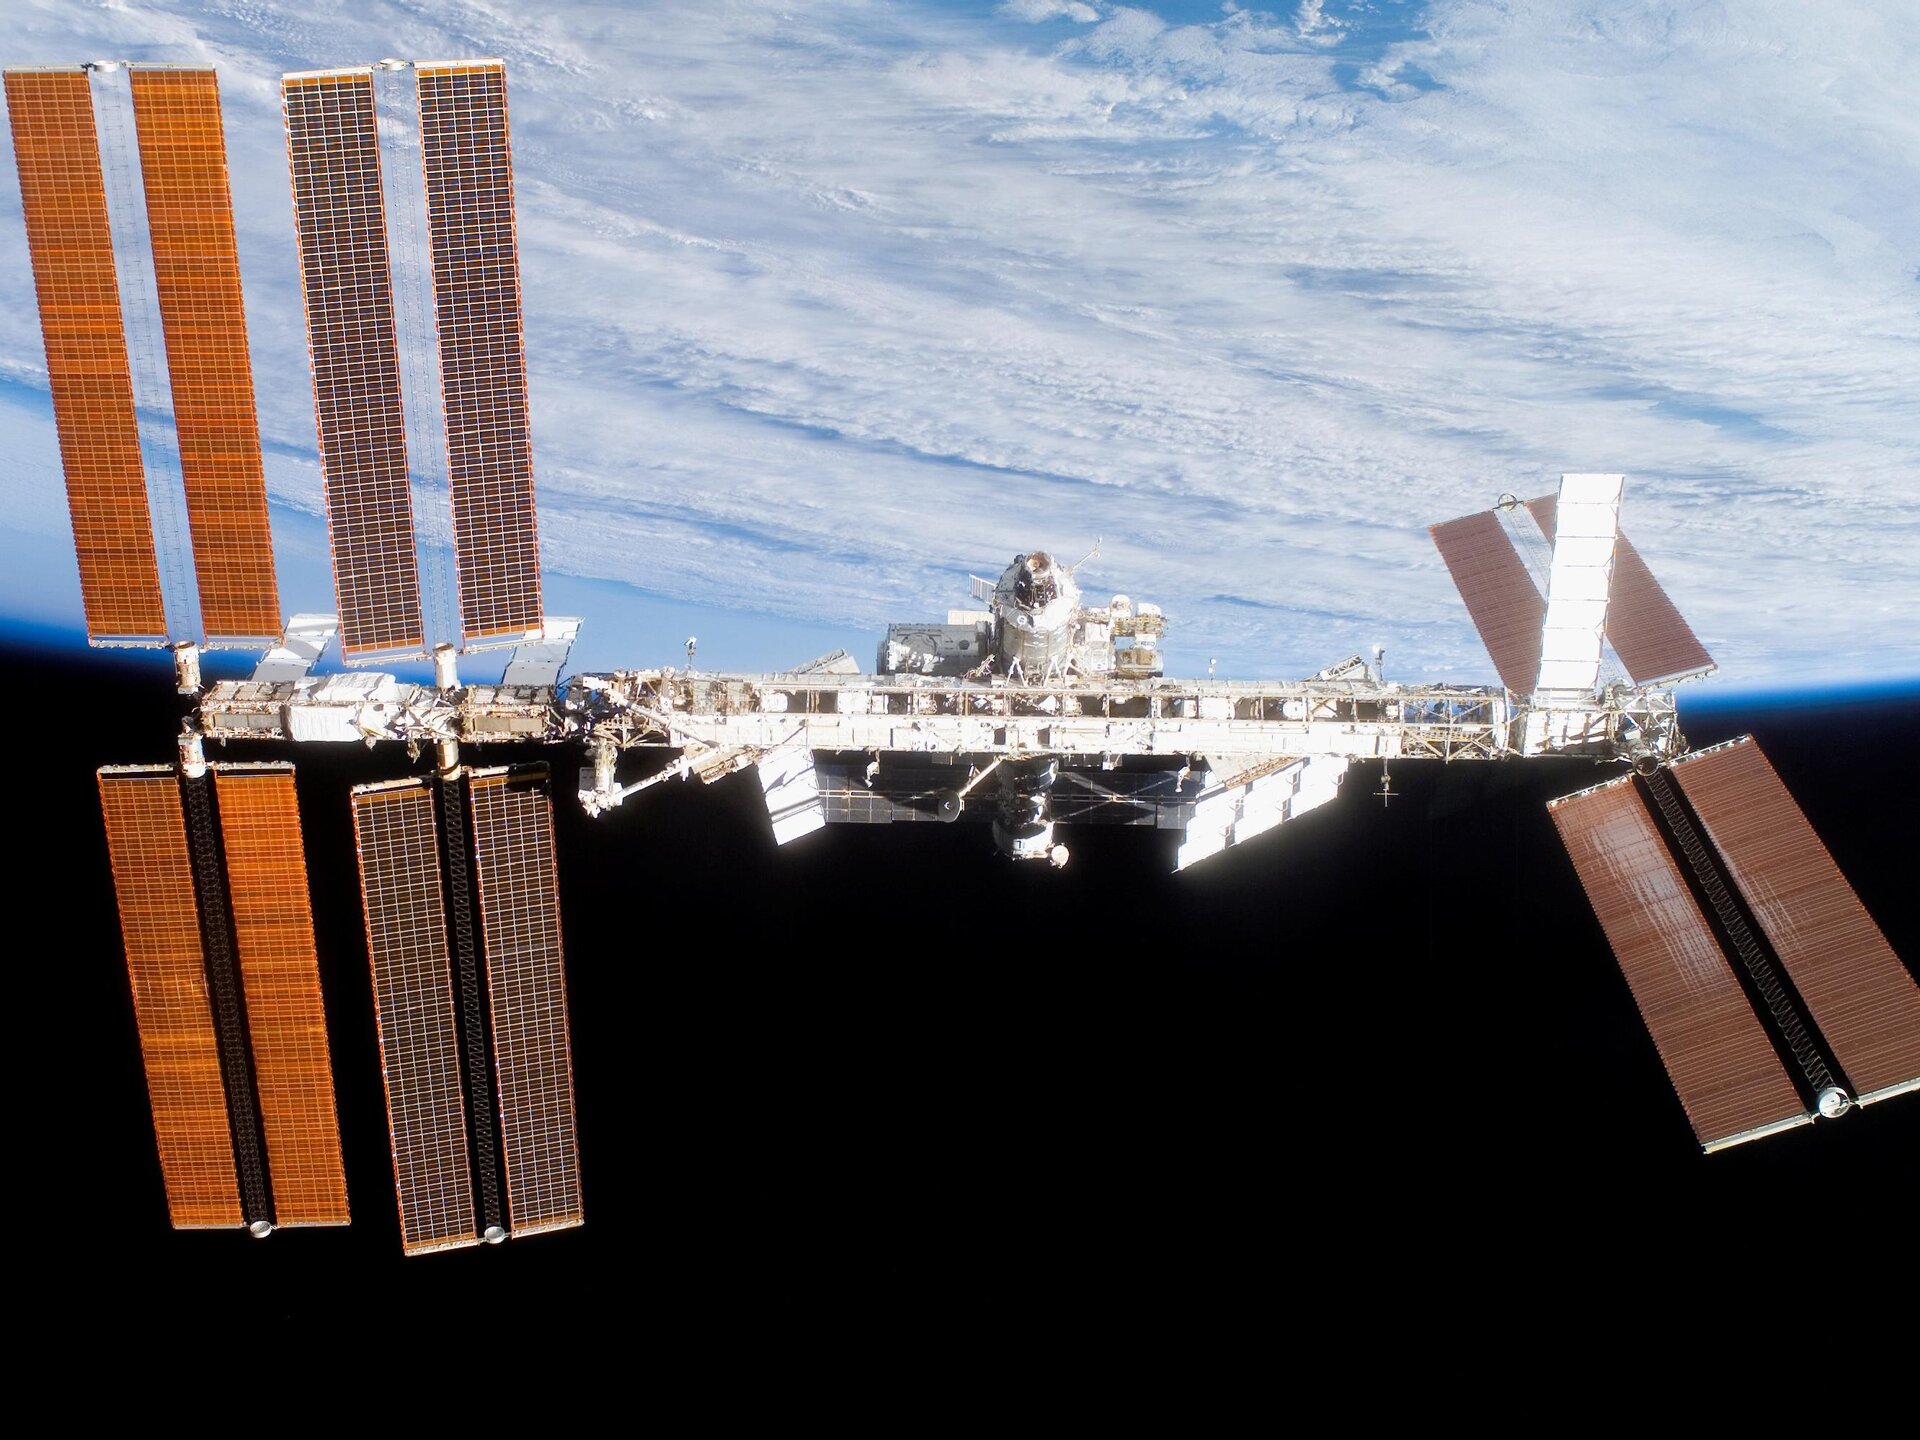 ISS activities will be discussed during NASA briefings